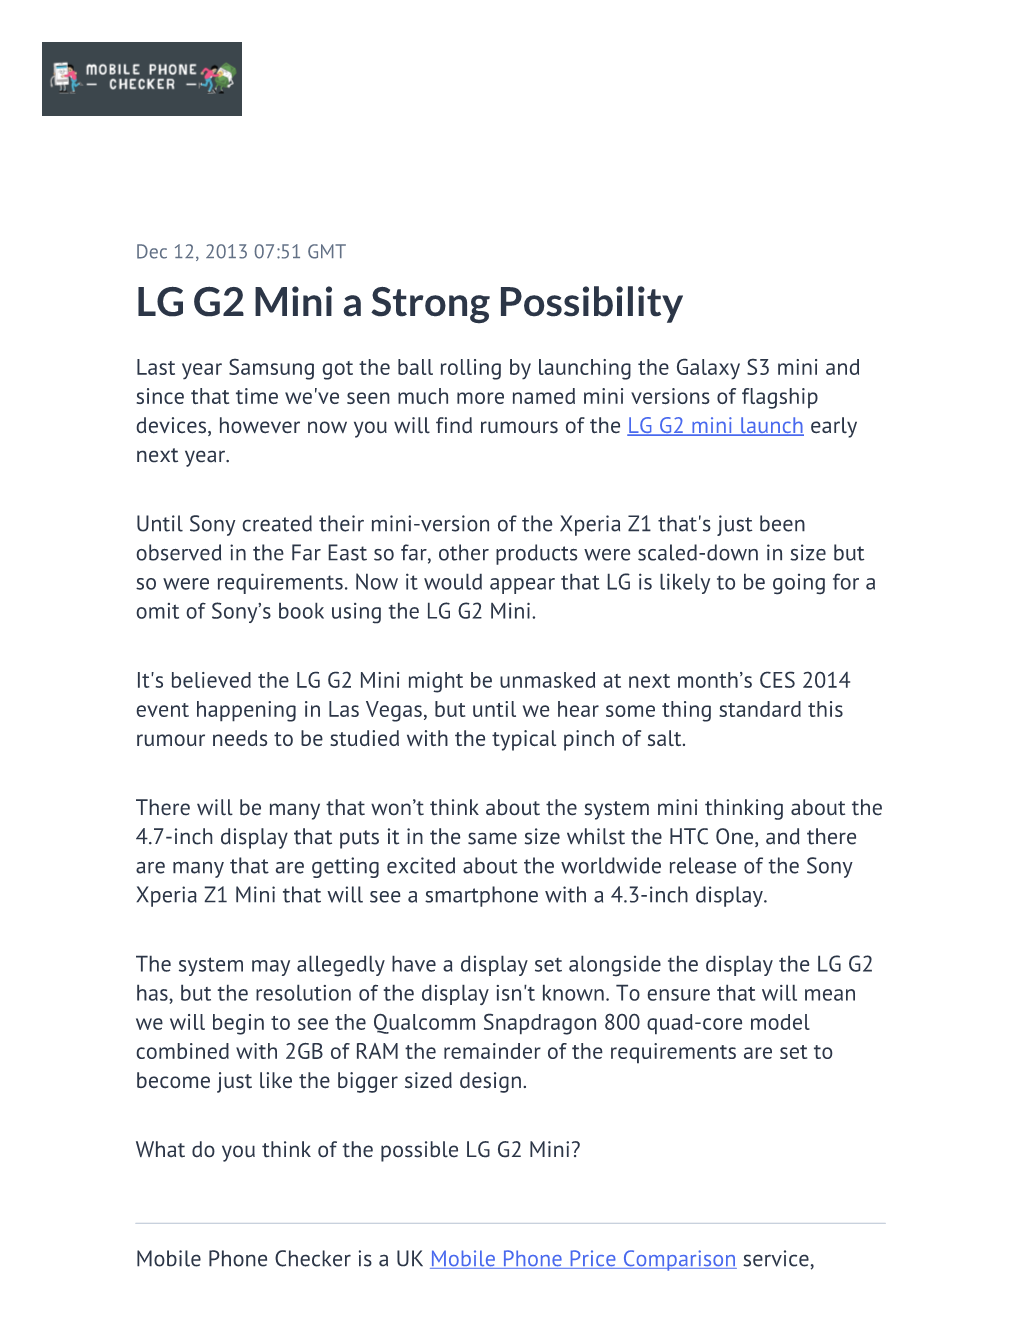 LG G2 Mini a Strong Possibility